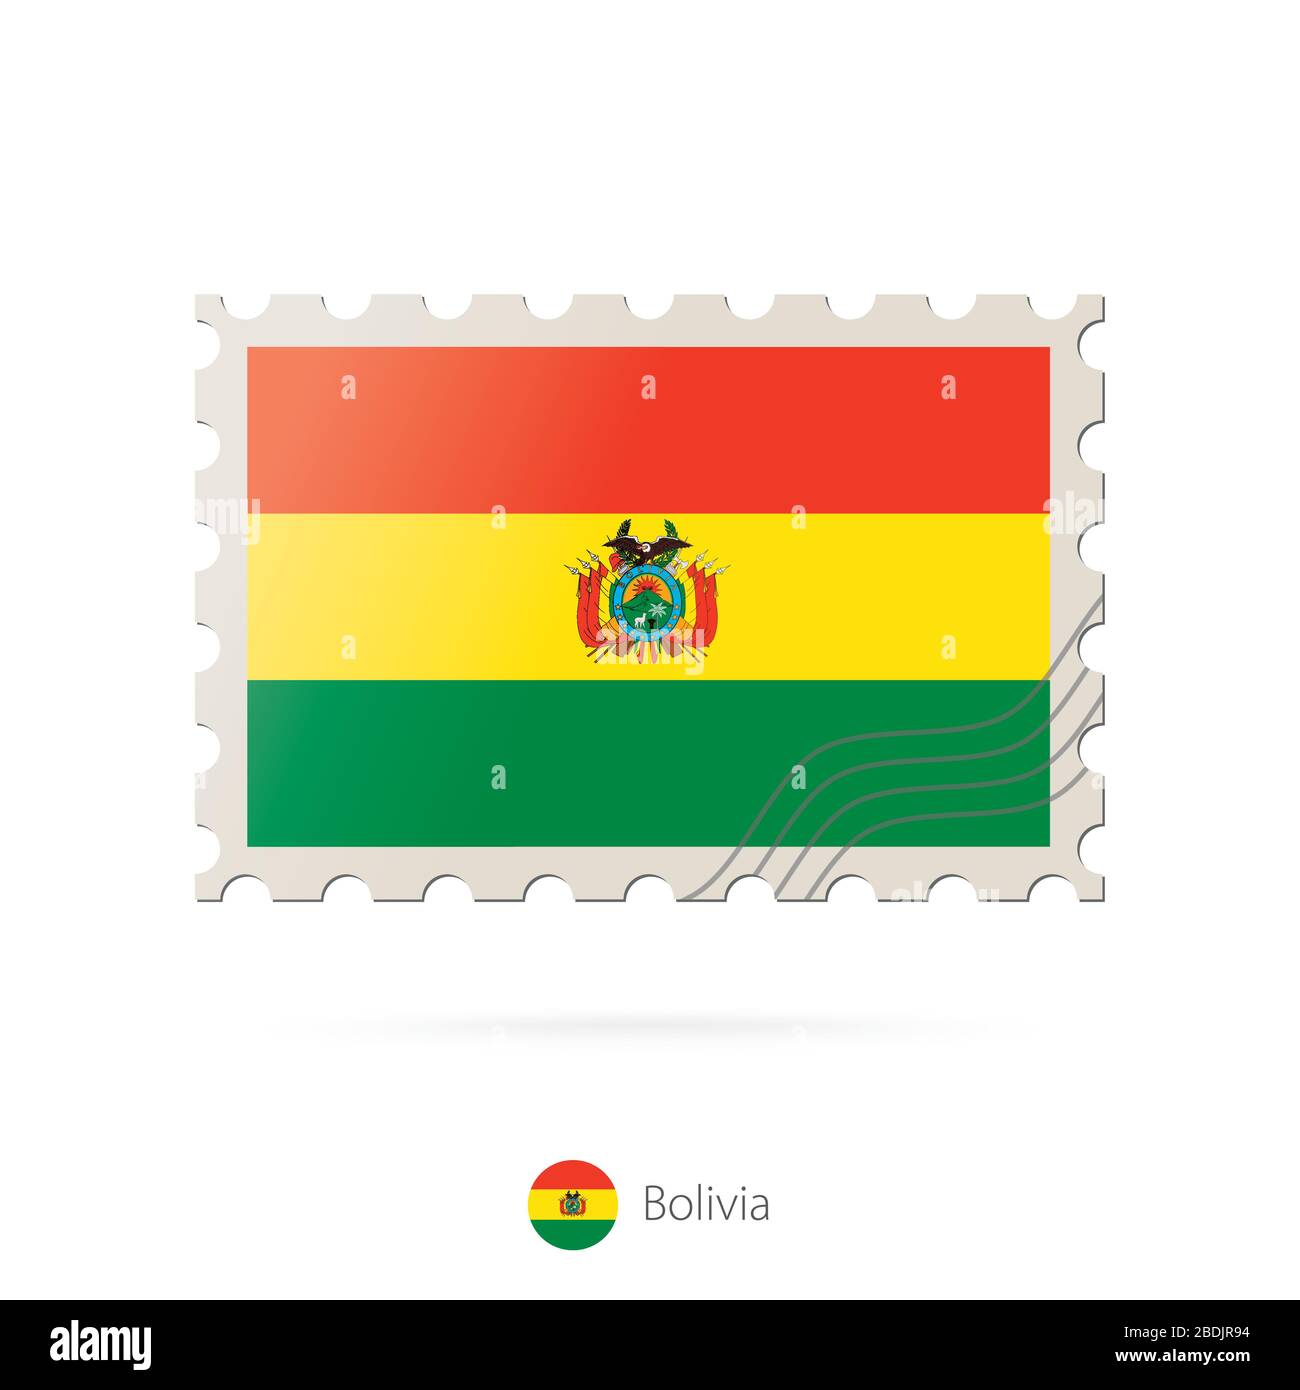 Postage stamp with the image of Bolivia flag. Bolivia Flag Postage on white background with shadow. Vector Illustration. Stock Vector